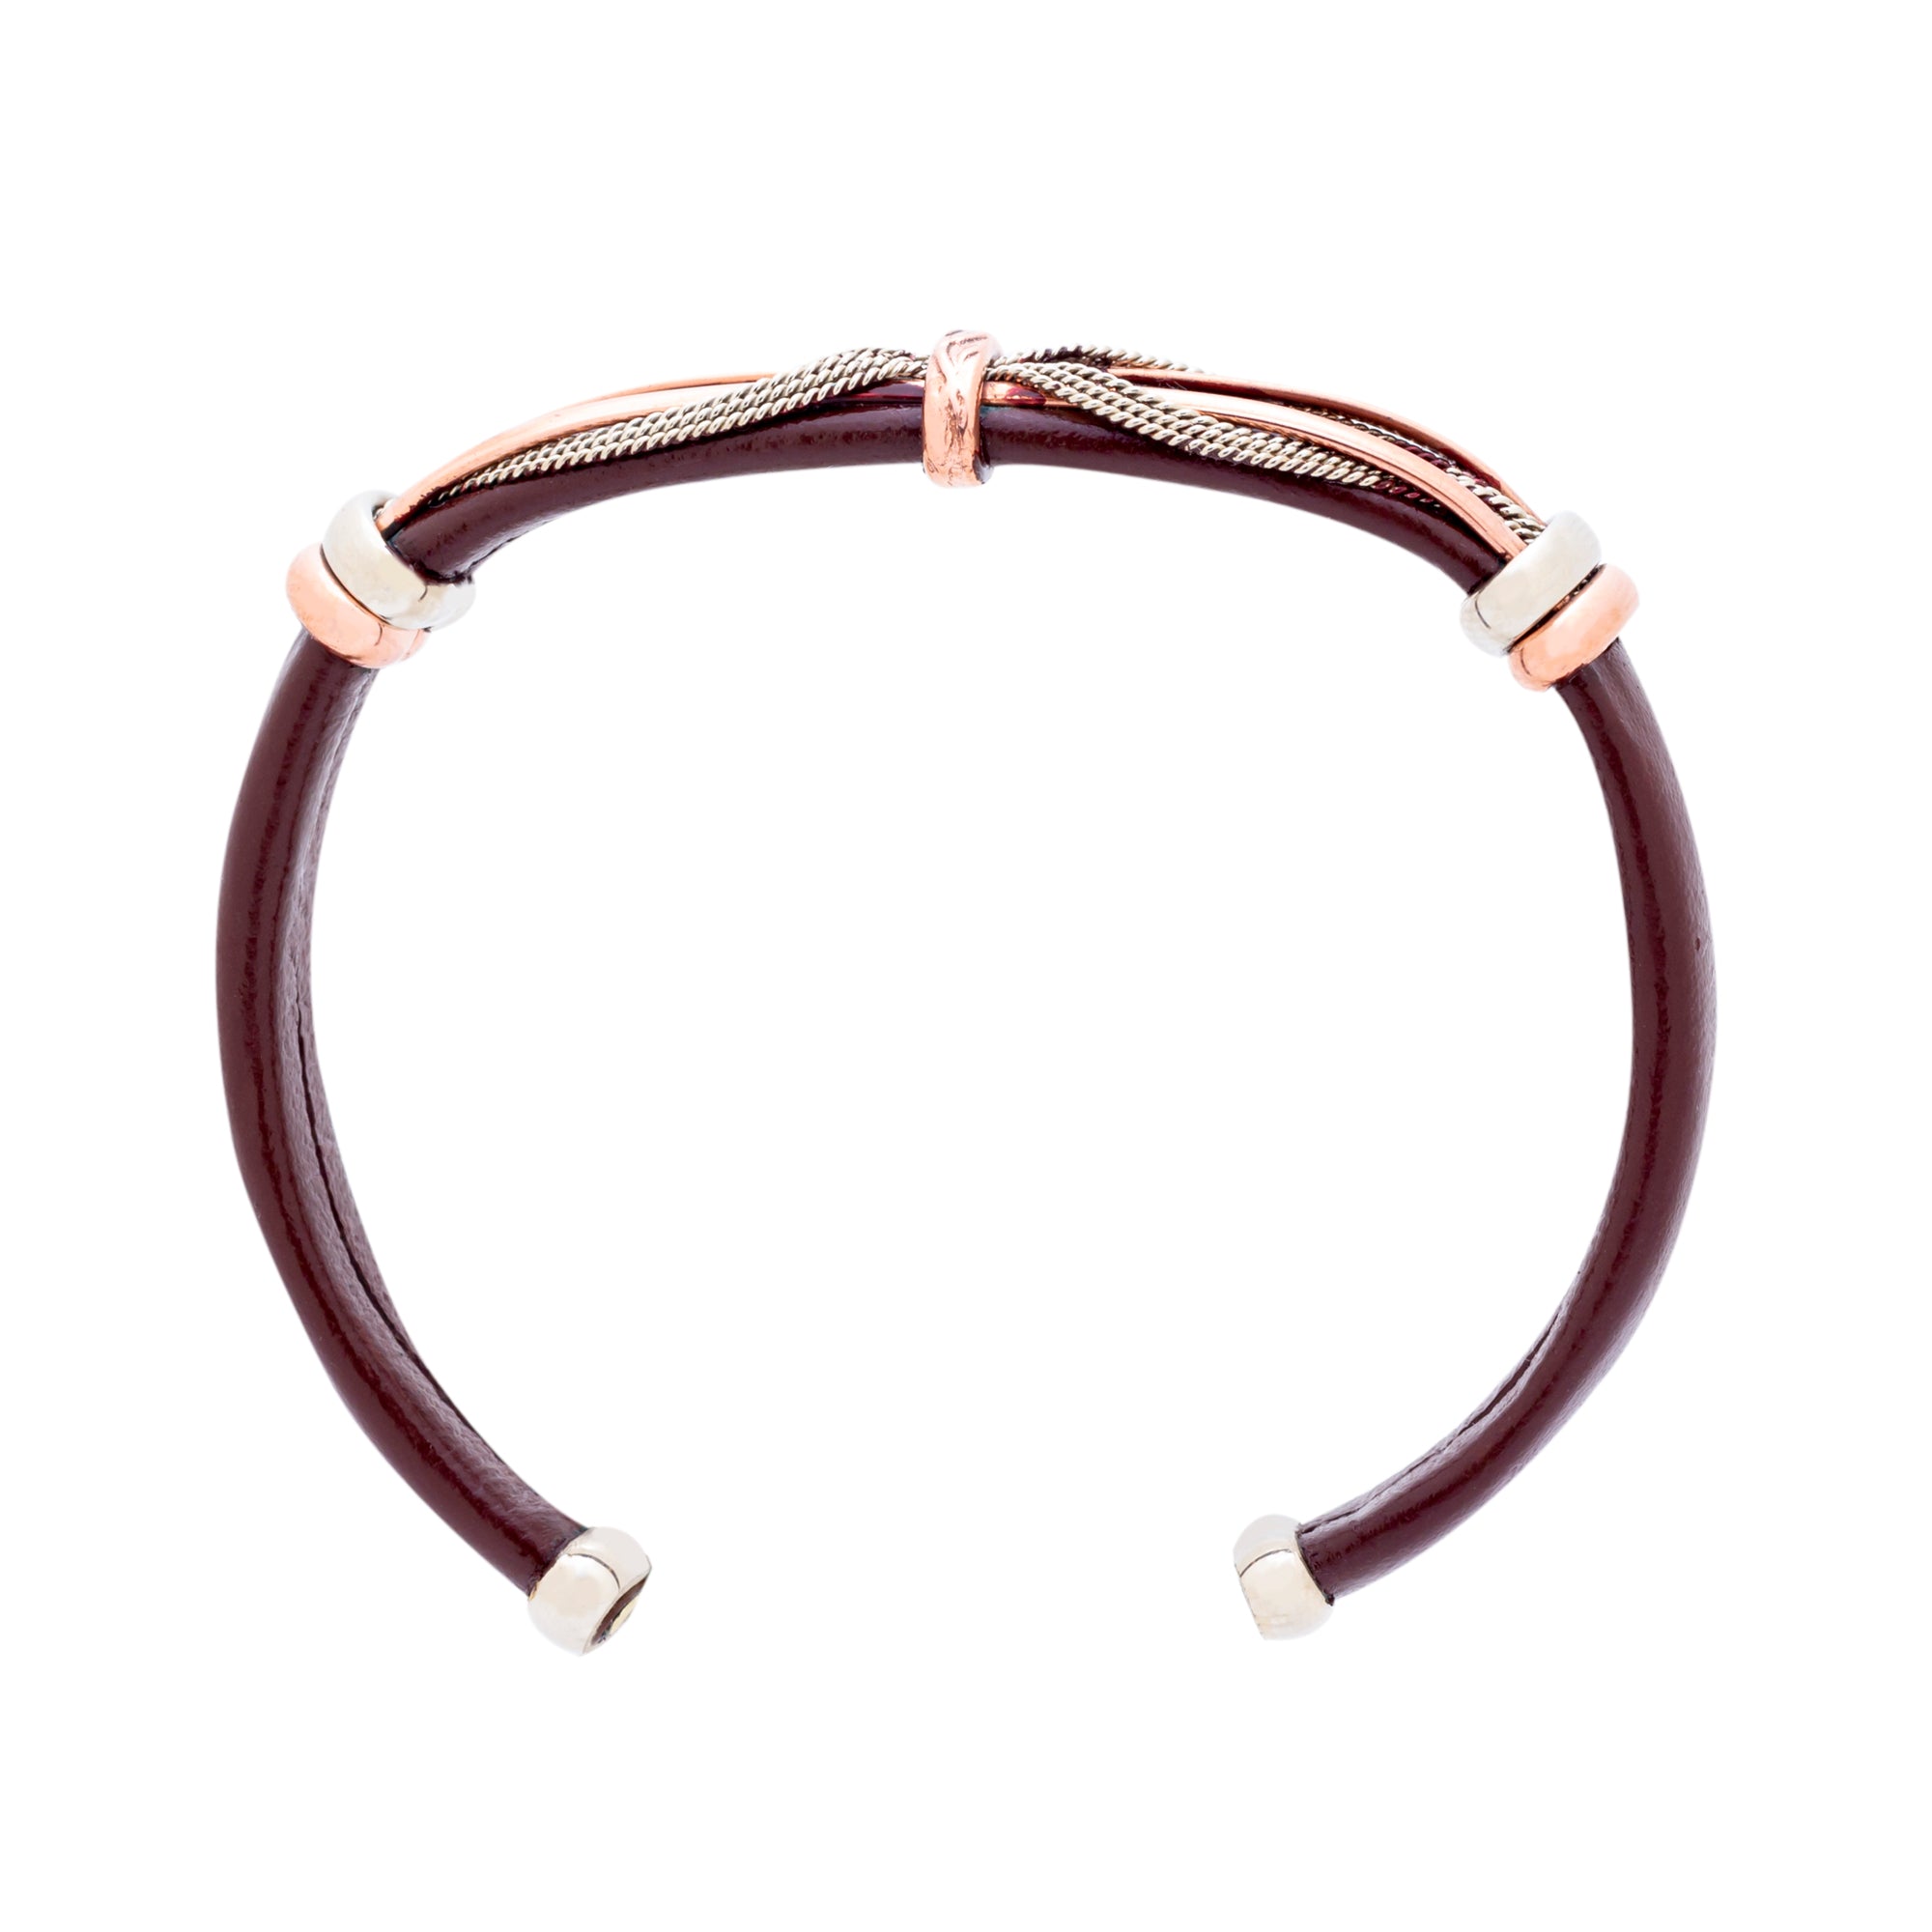 Leather Bracelet BR.ULB.0306 - Brown Leather Cuff Bracelet -Handcrafted by HPSilver, LLC.